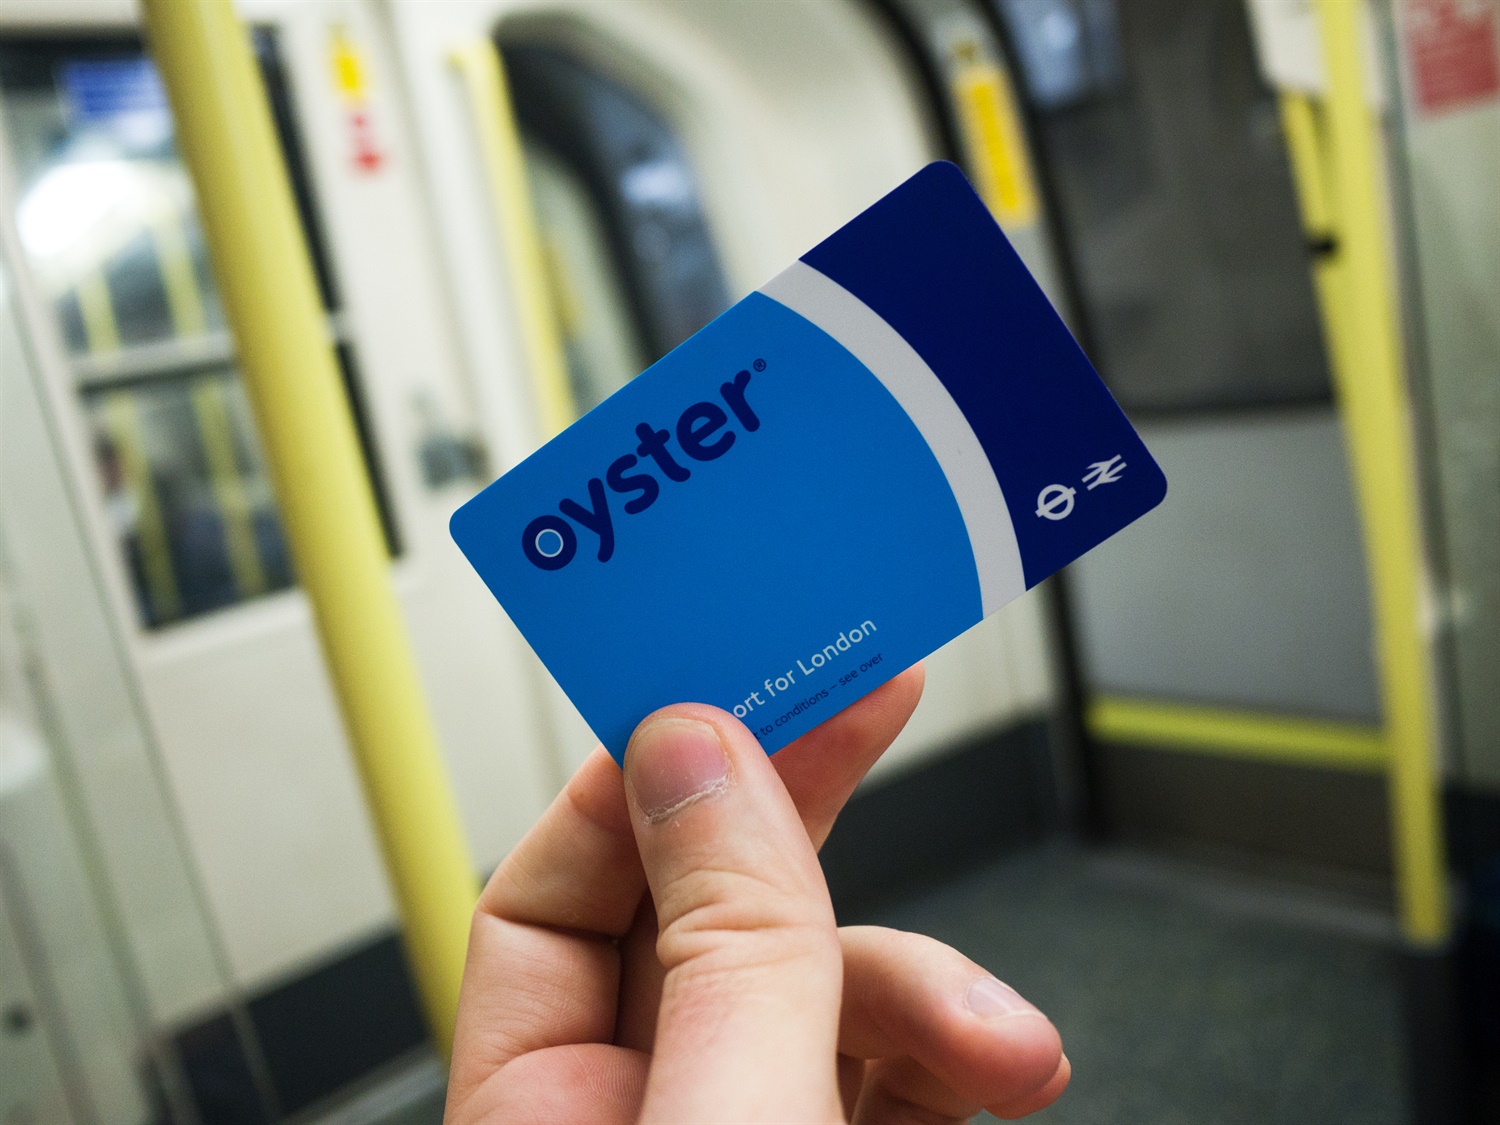 Rail minister urged to back extension of Oyster and contactless payments at London airports